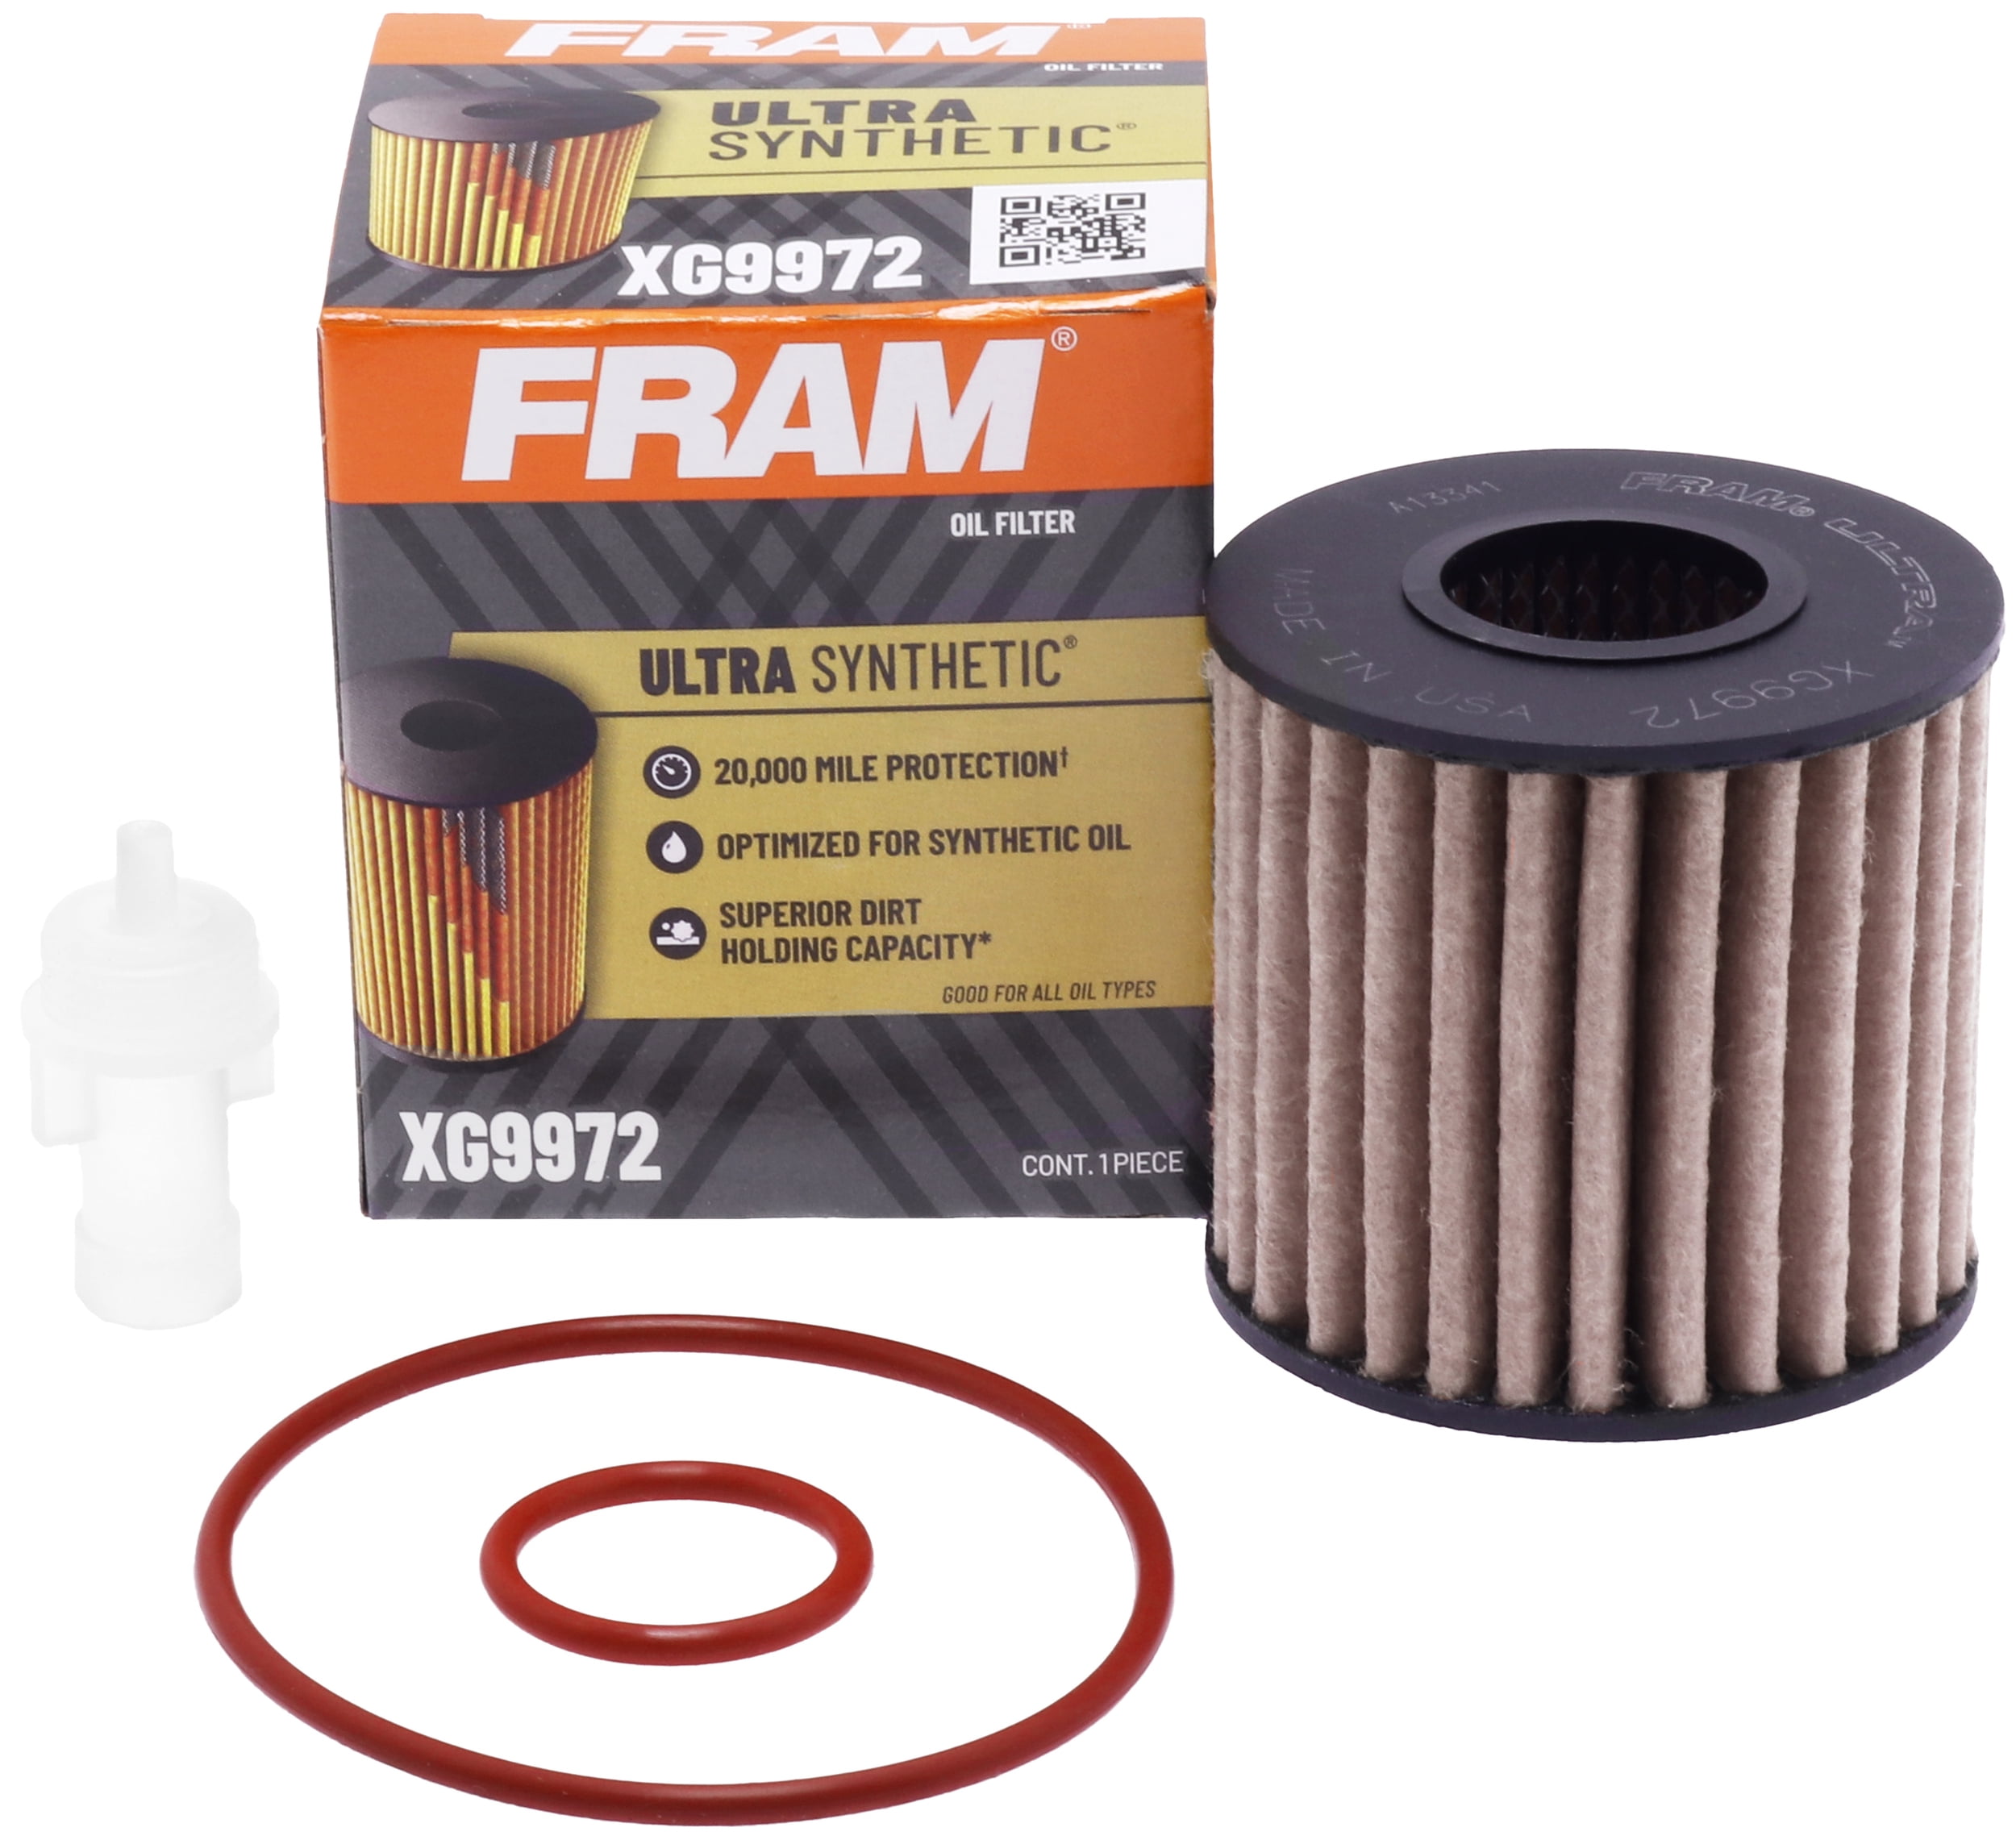 MANN-FILTER: Premium filters for 300,000 applications